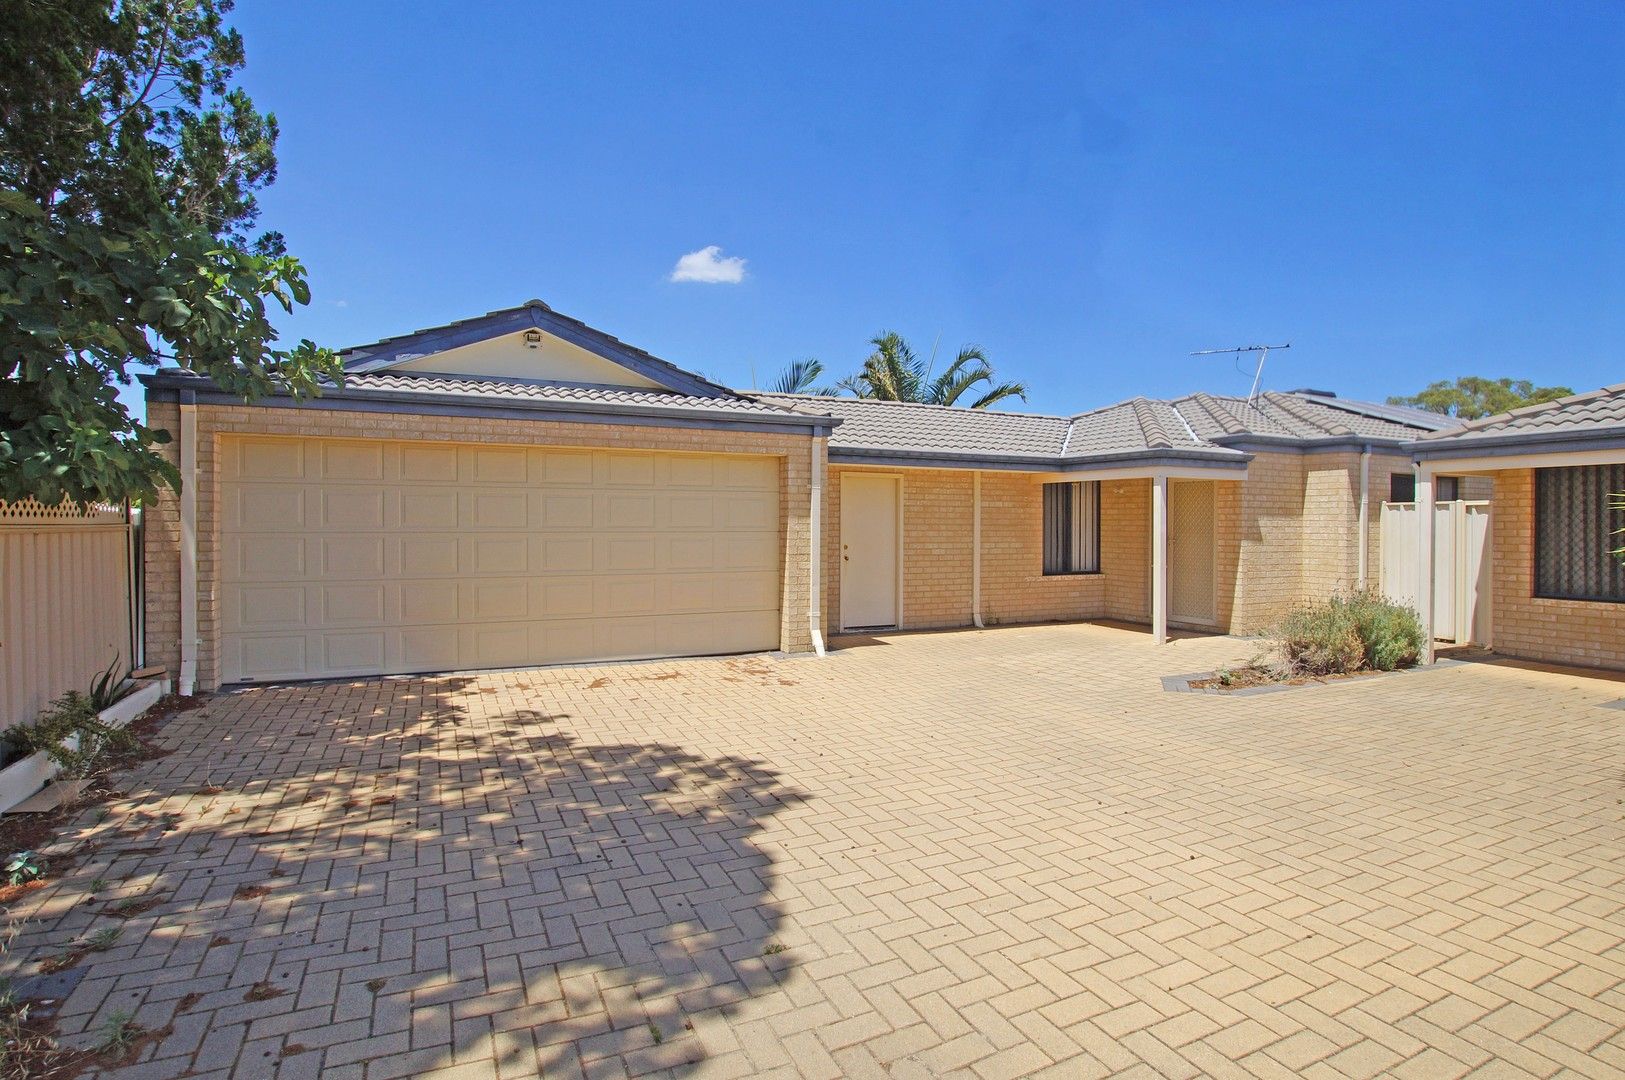 3 bedrooms House in 4/9 Sefton Place LANDSDALE WA, 6065